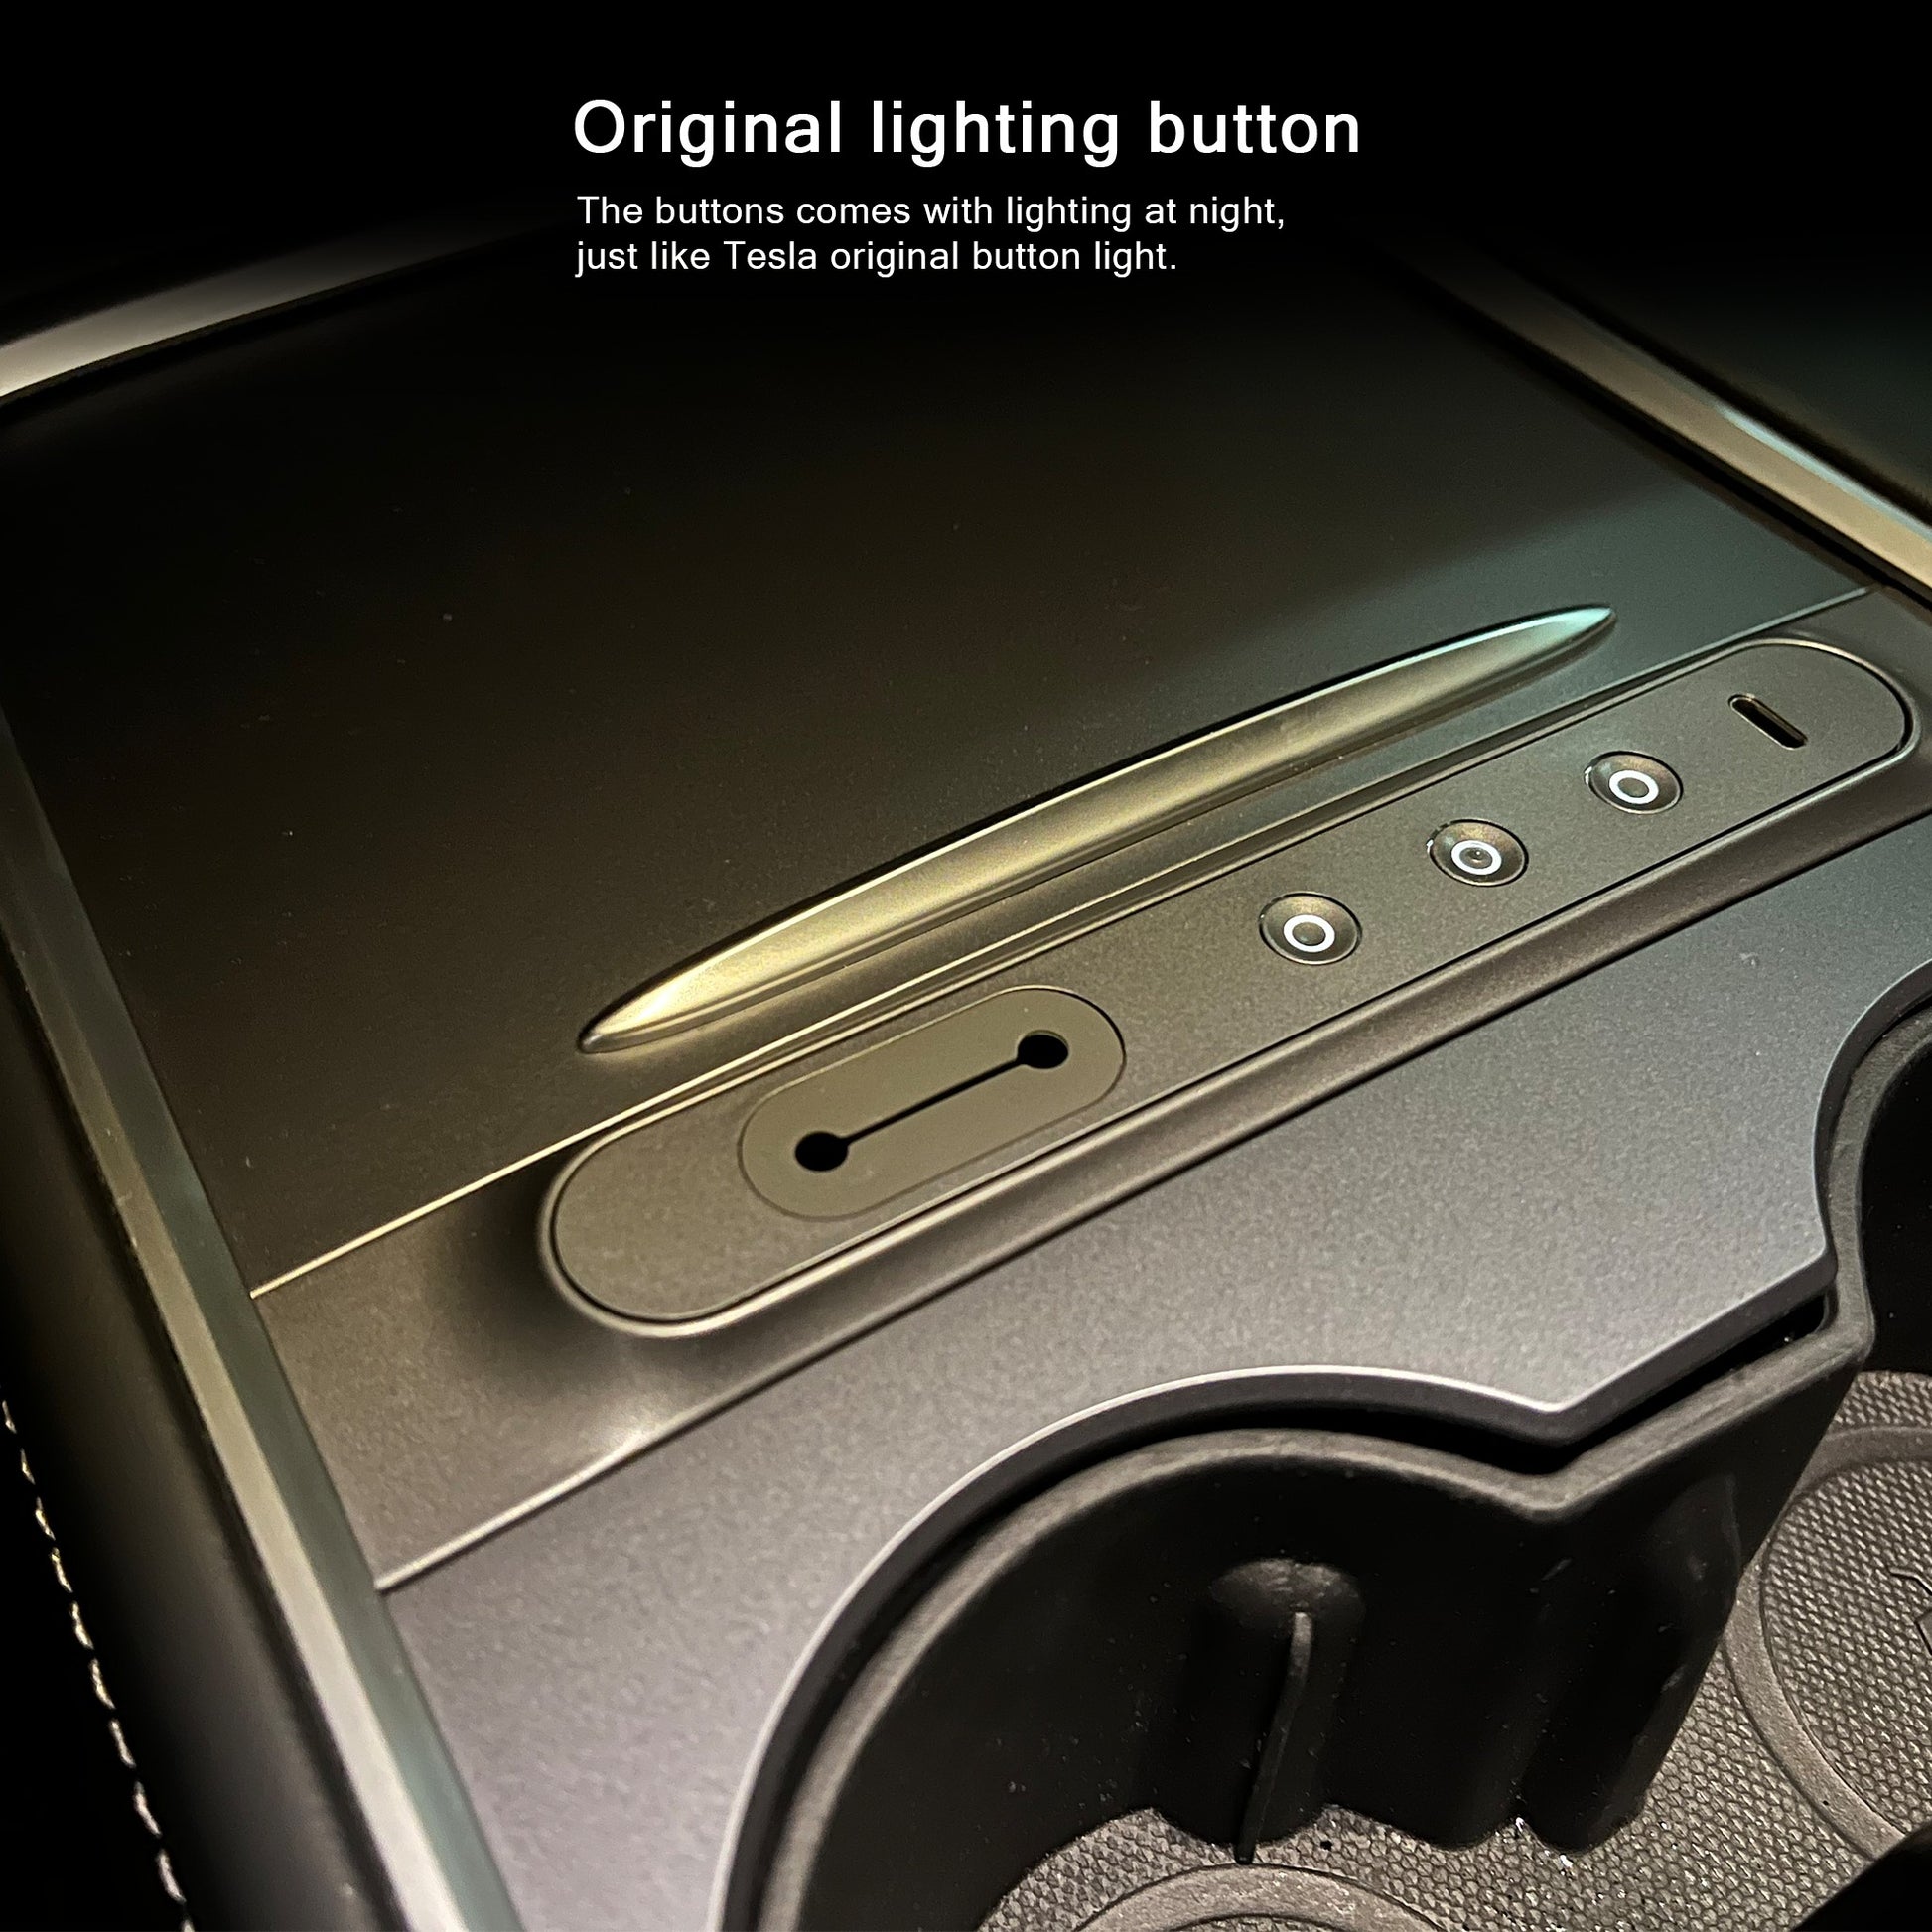 Tesla finally gets buttons and physical inputs, thanks to new